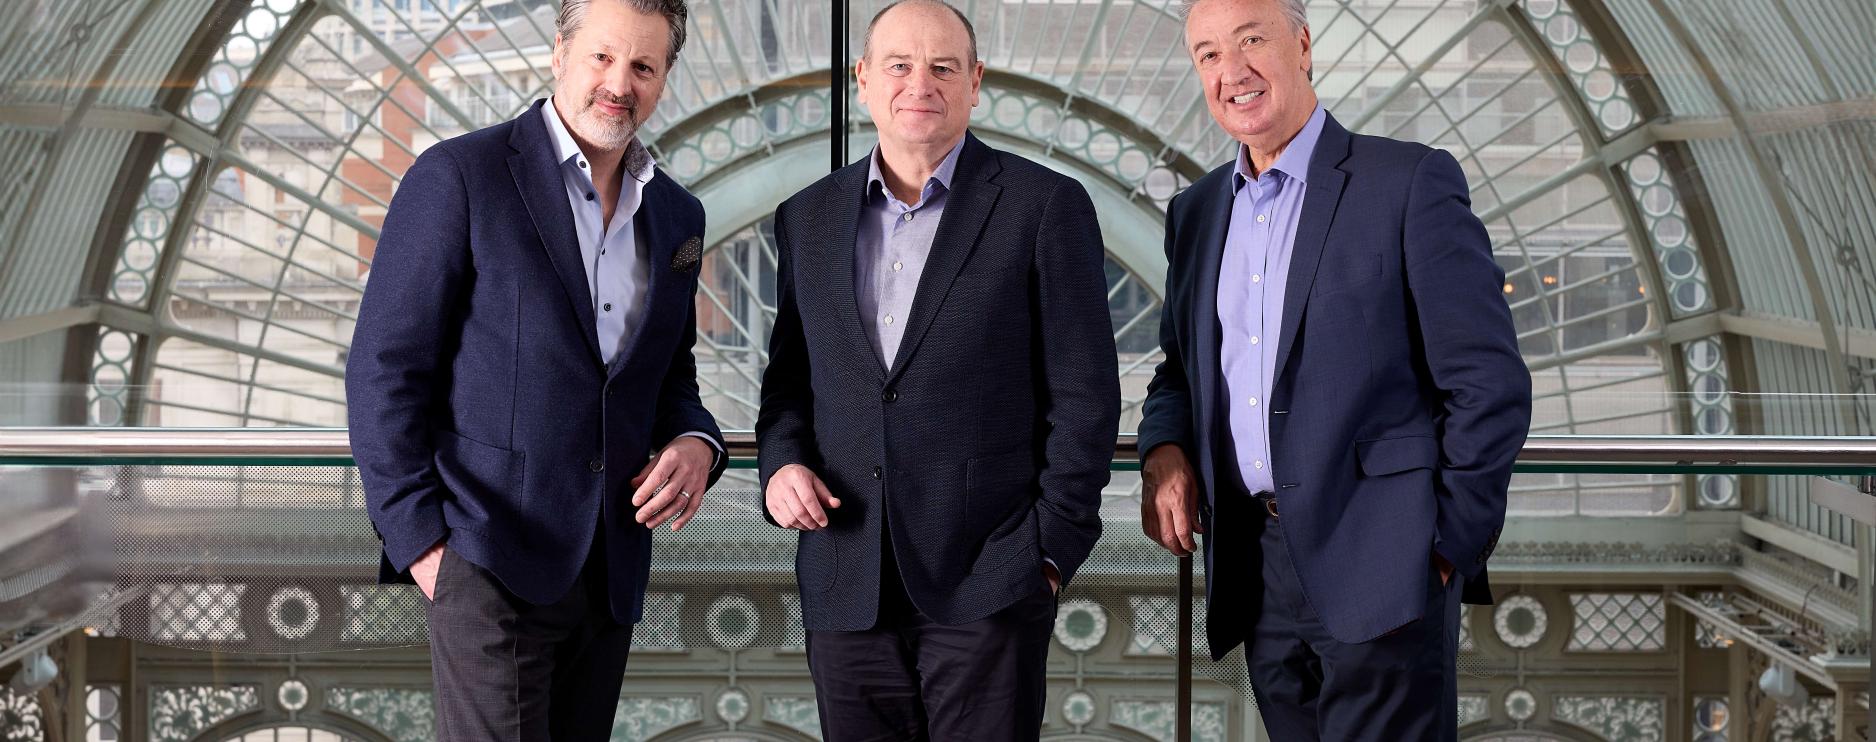 CH&CO joins Compass Group in landmark acquisition 